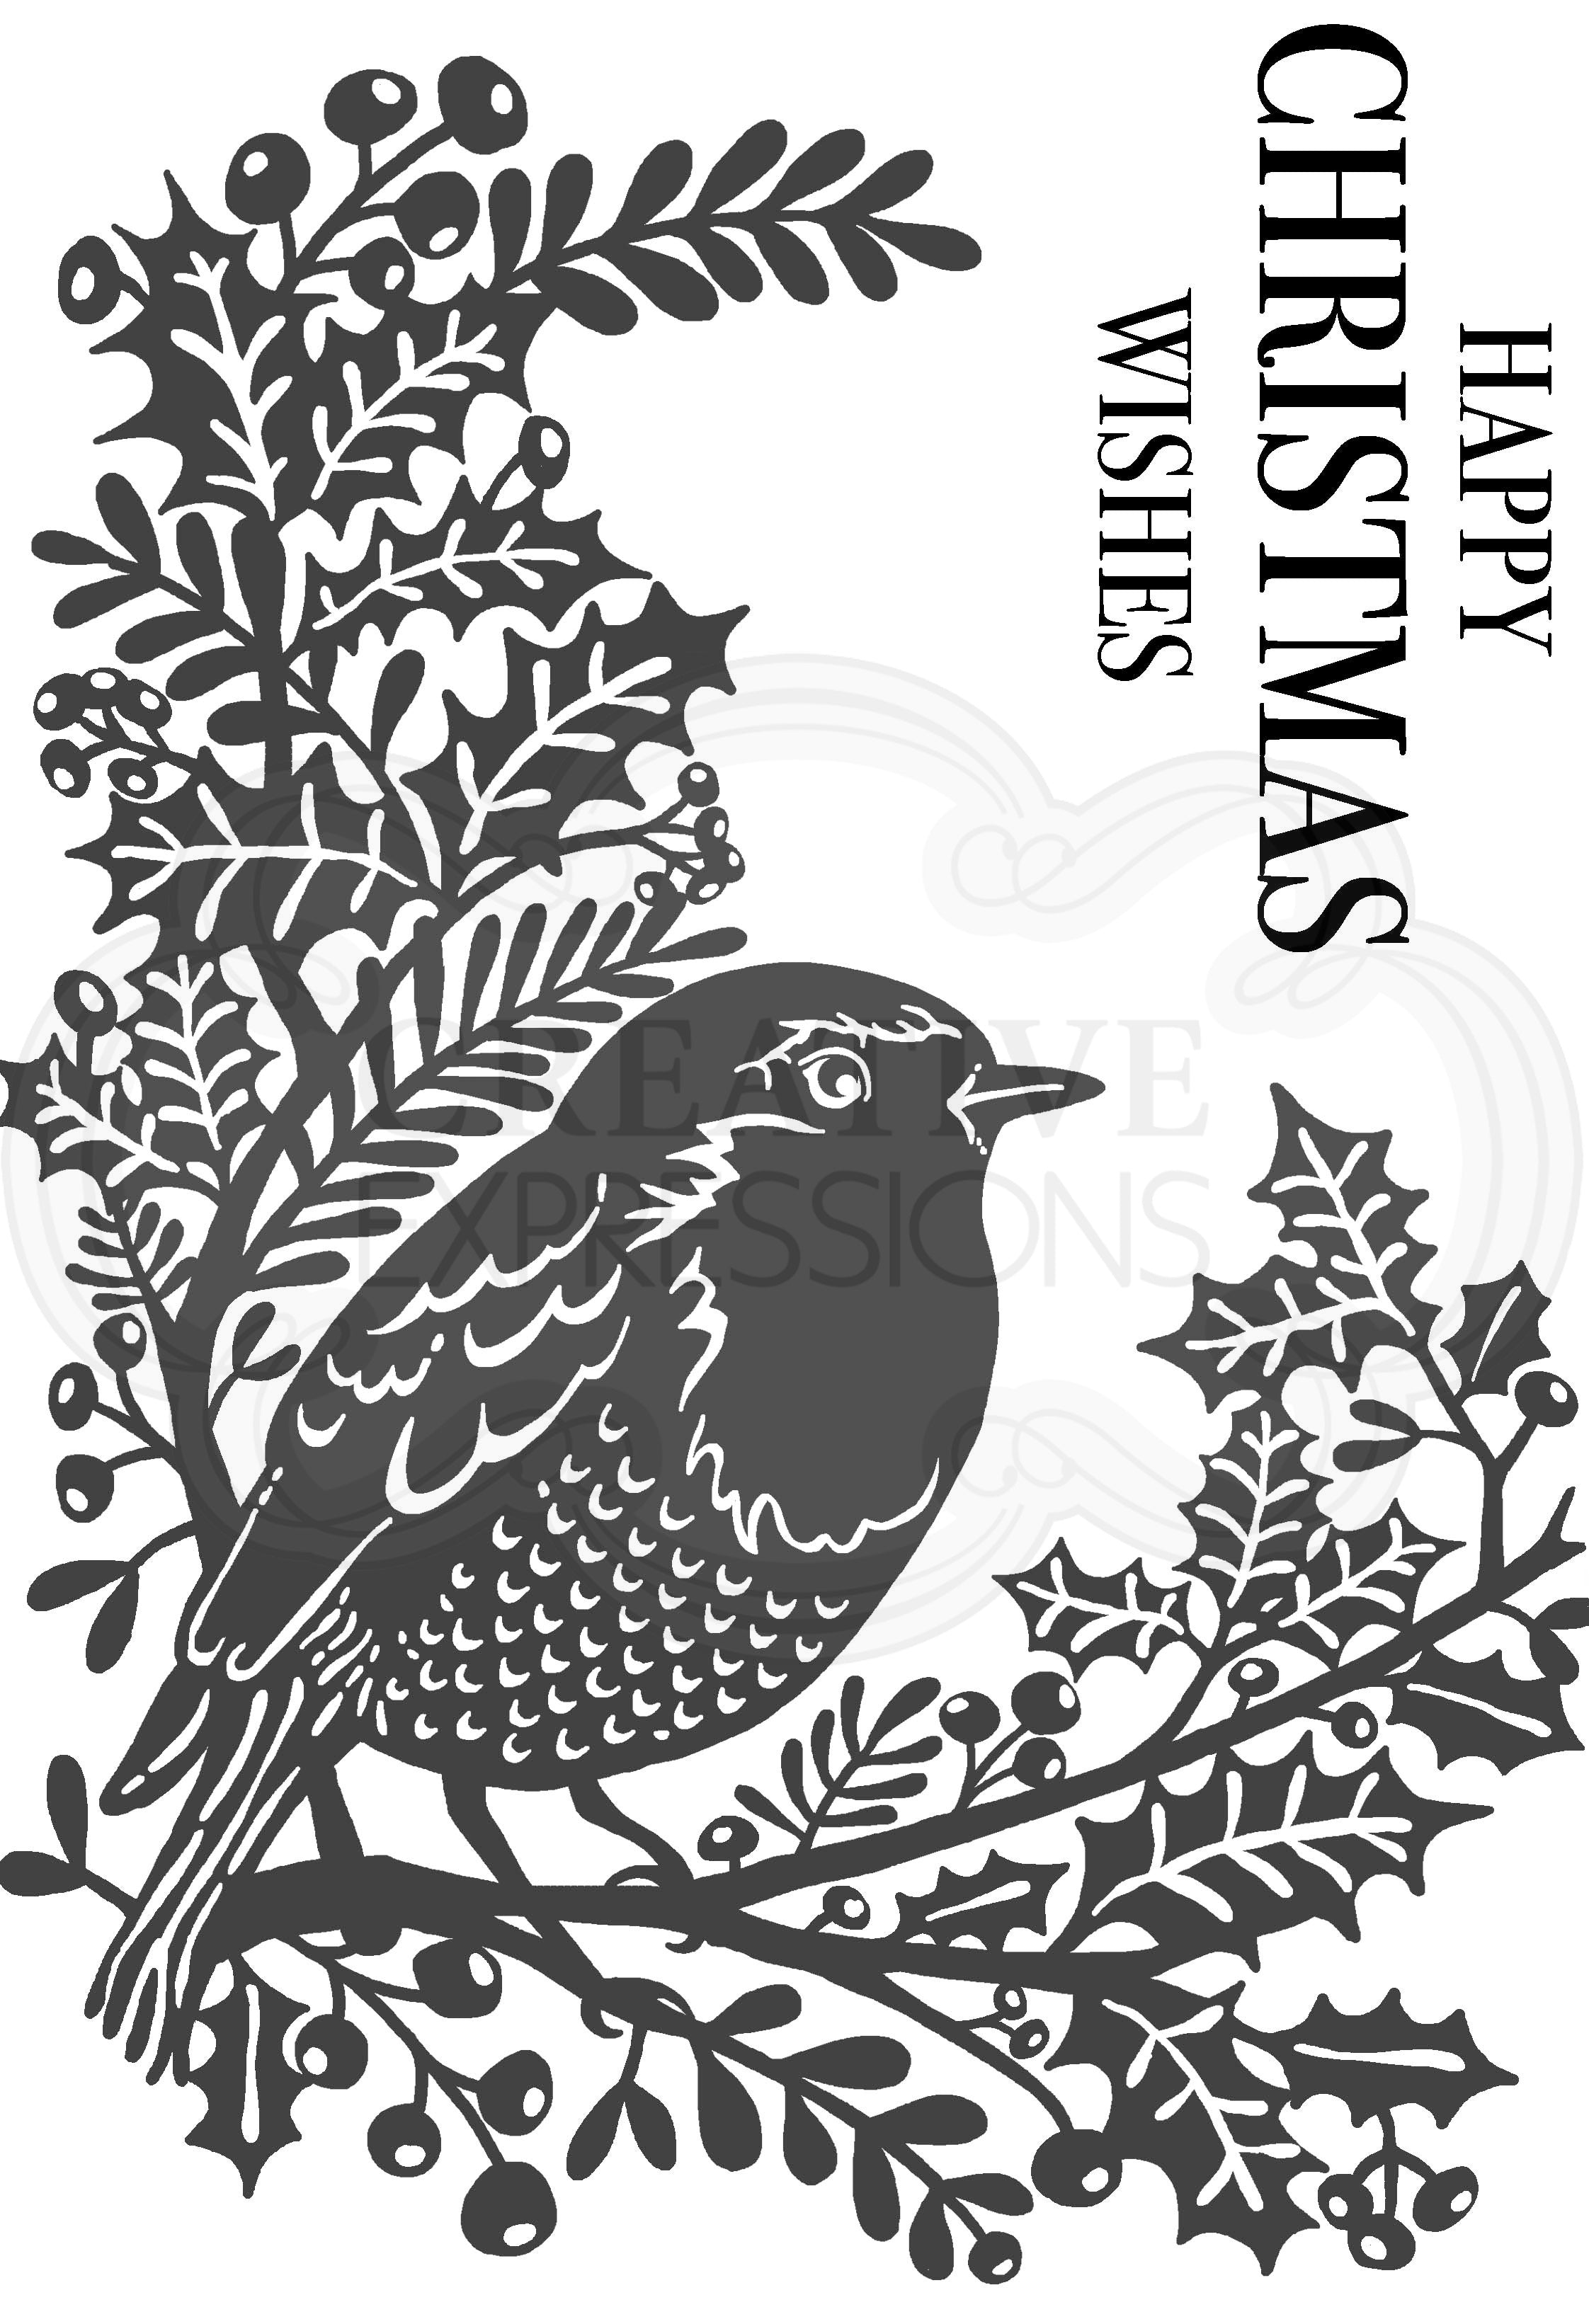 Woodware Clear Singles Lino Cut - Robin and Holly 4 in x 6 in Stamp